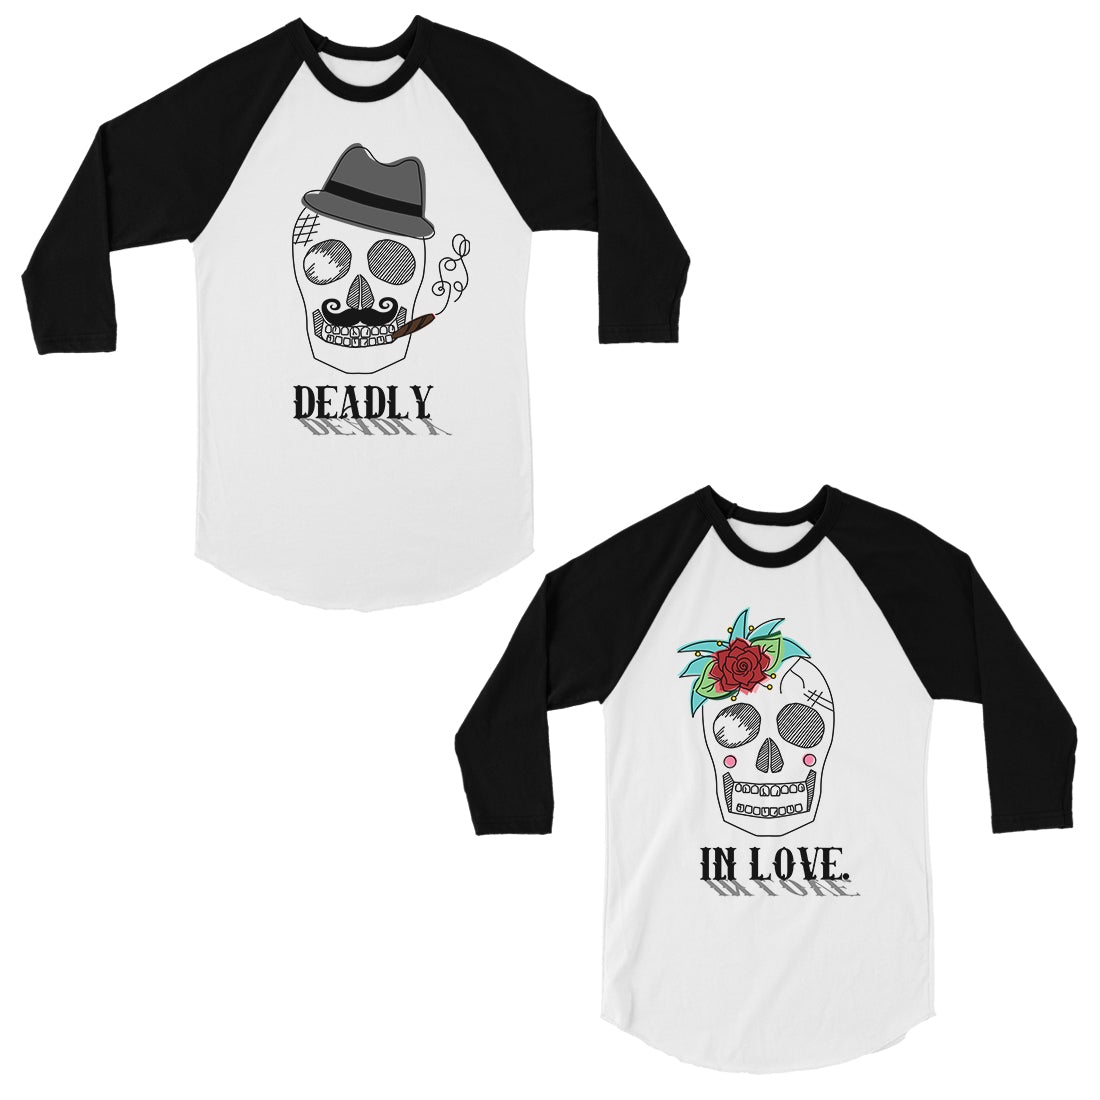 Deadly In Love Matching Couples Baseball Shirts Black and White